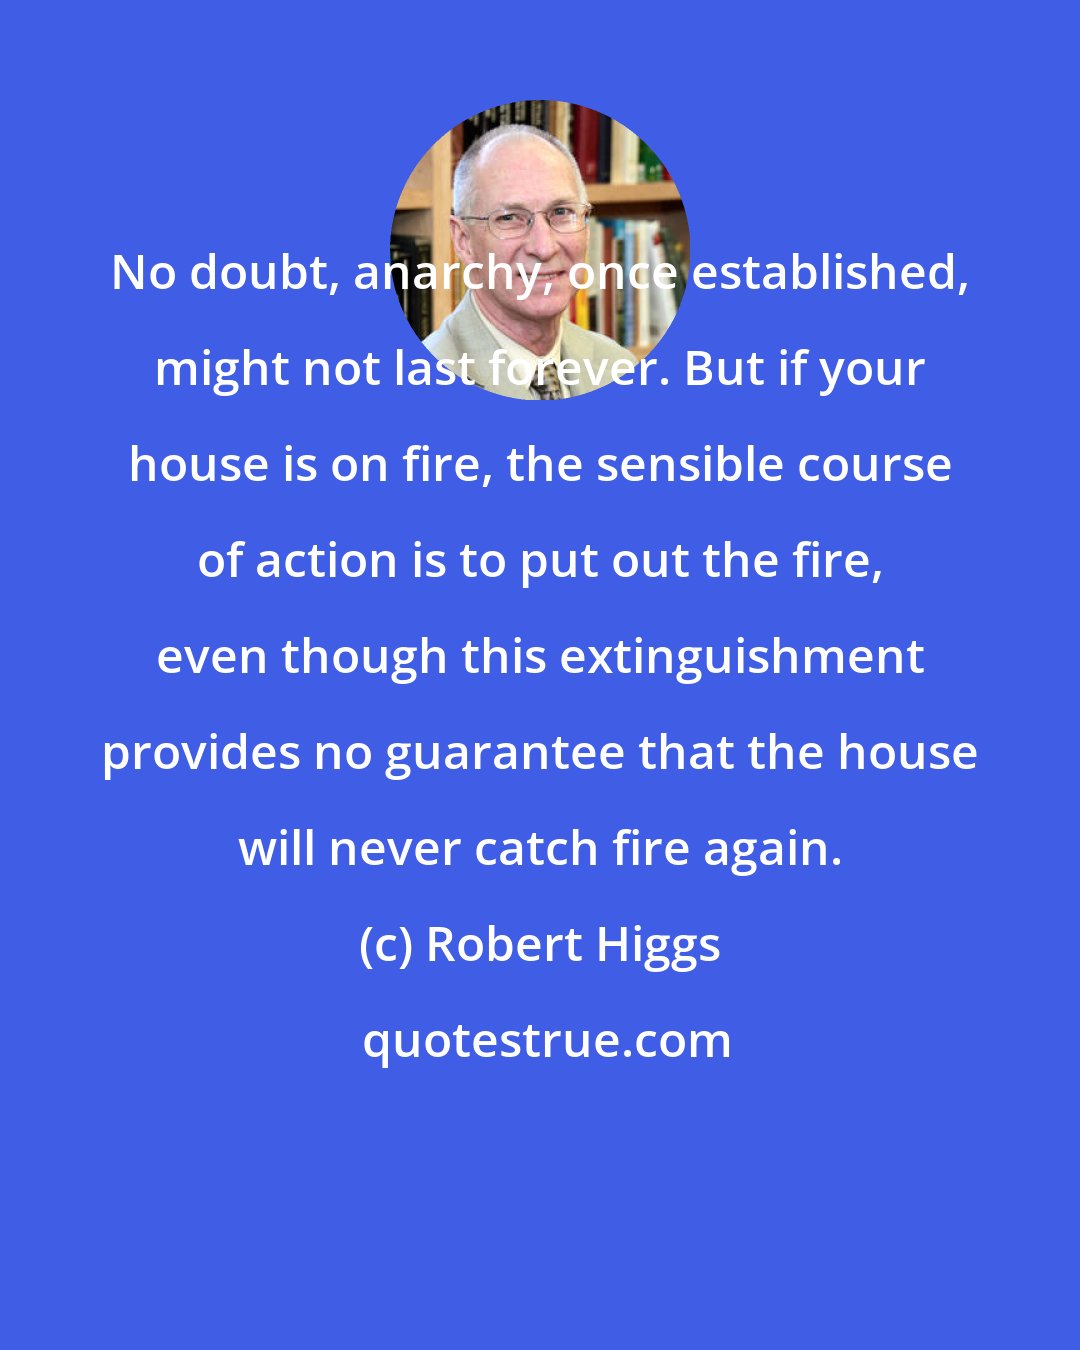 Robert Higgs: No doubt, anarchy, once established, might not last forever. But if your house is on fire, the sensible course of action is to put out the fire, even though this extinguishment provides no guarantee that the house will never catch fire again.